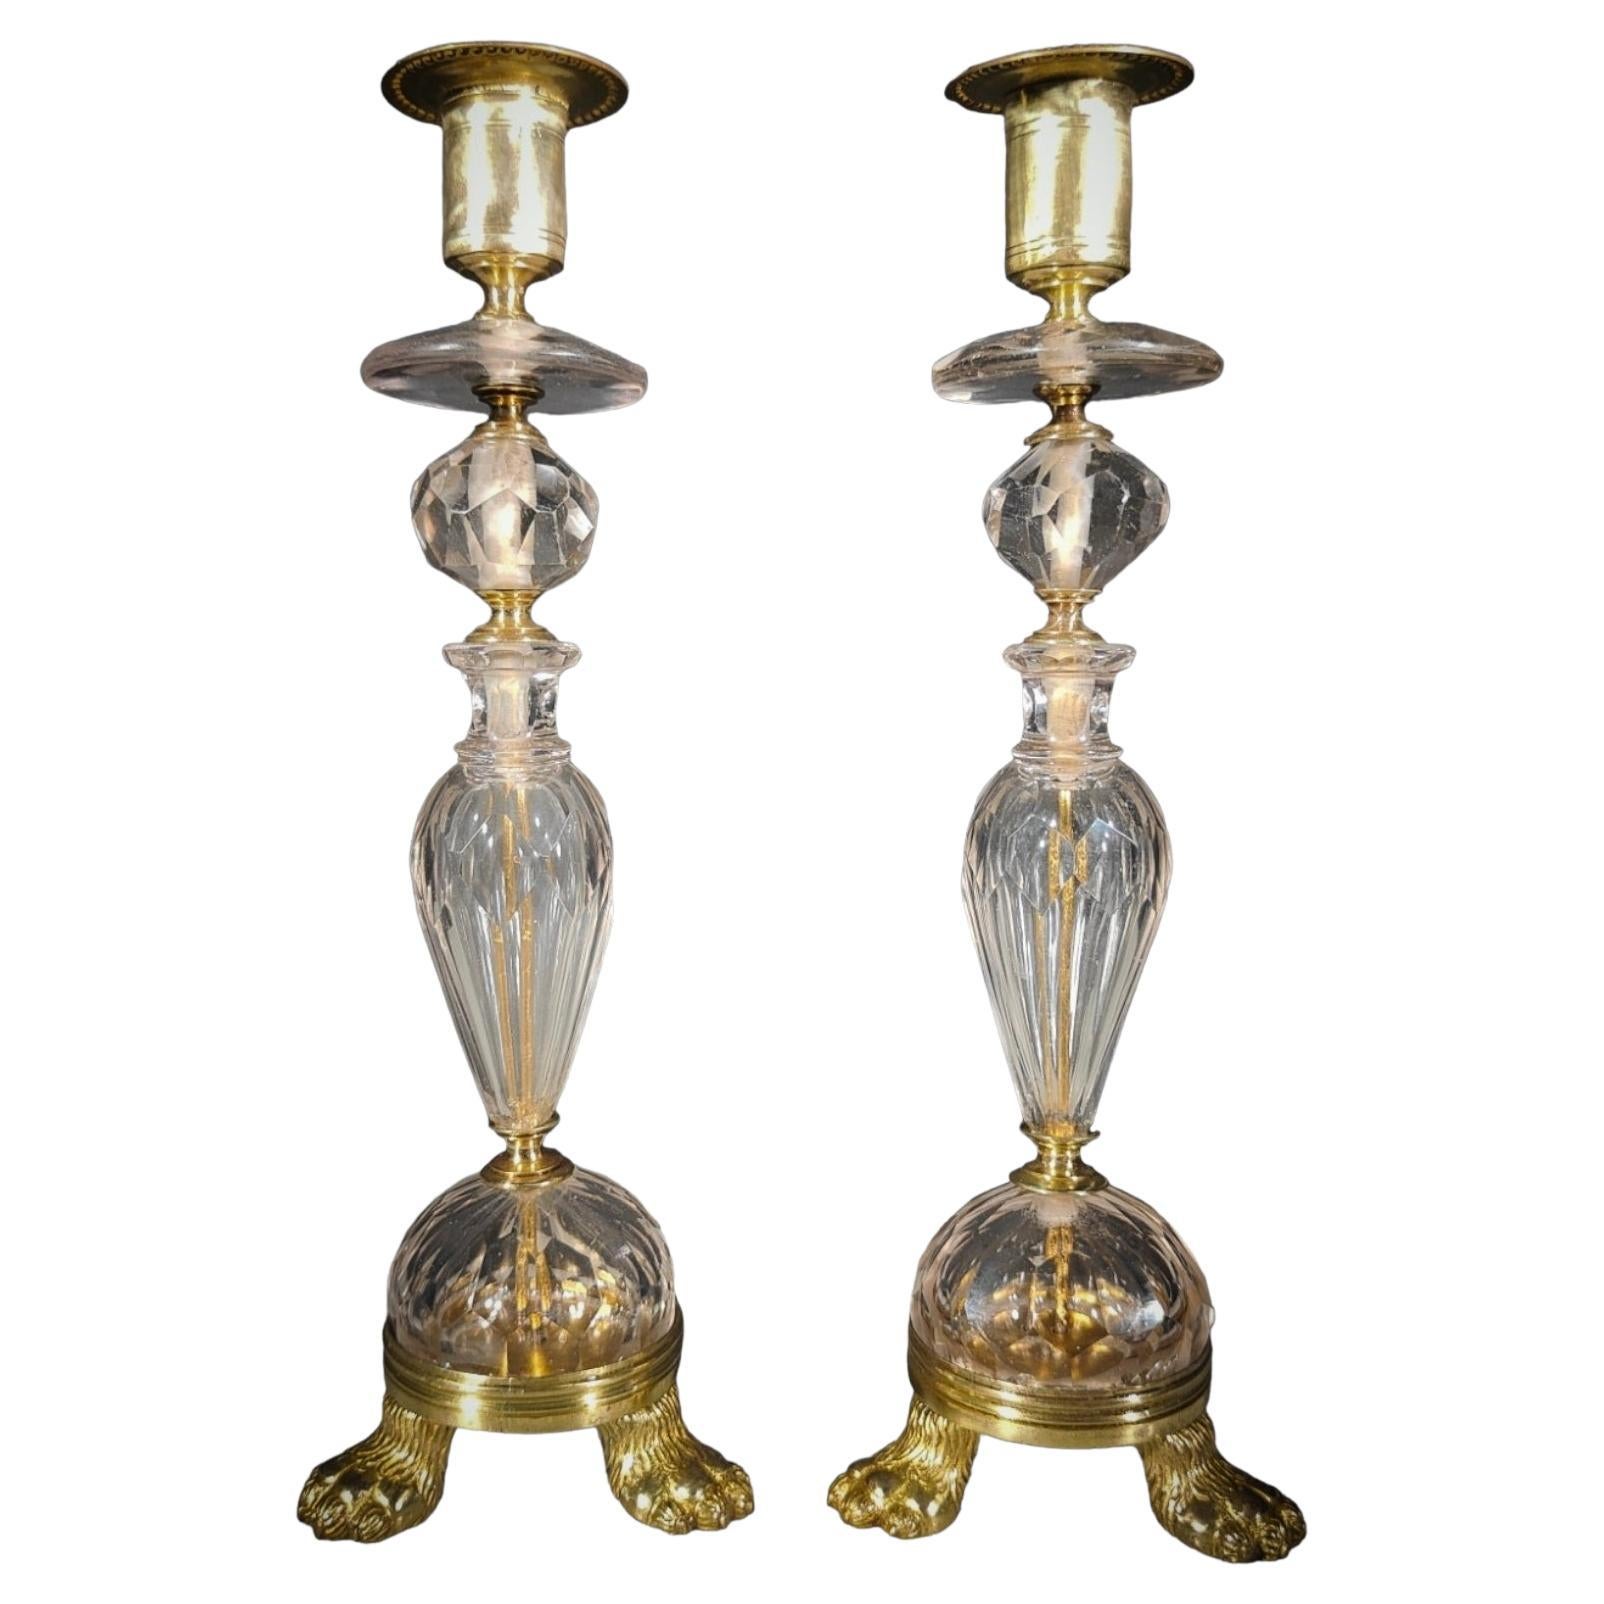 A Pair Of Crystal Candlesticks And Gilt Bronze Mounts, Late 17th Century